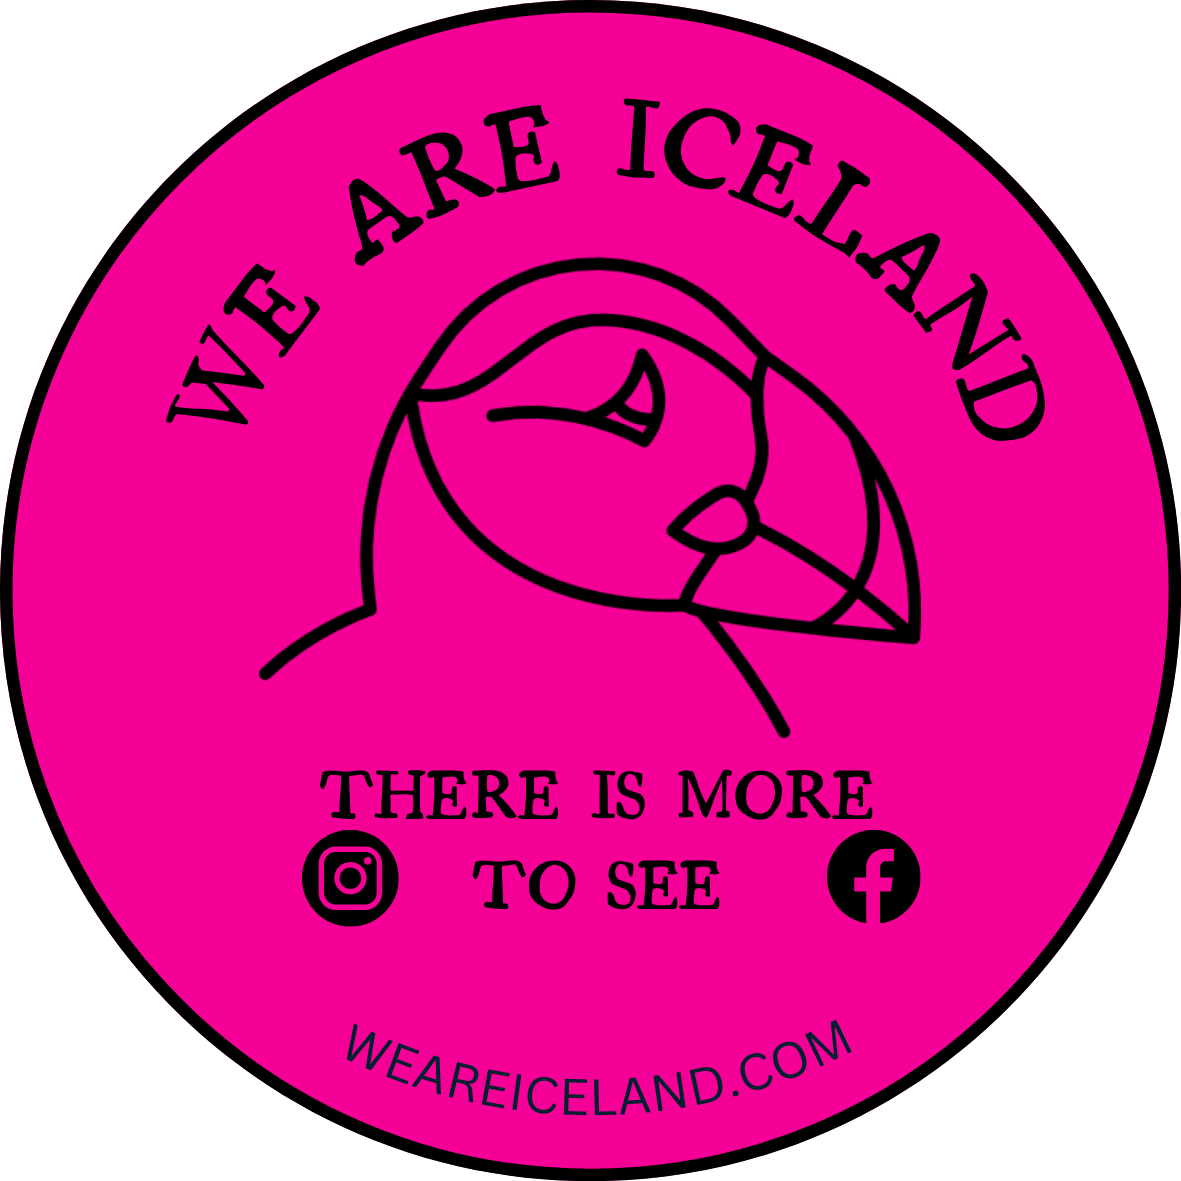 We are Iceland